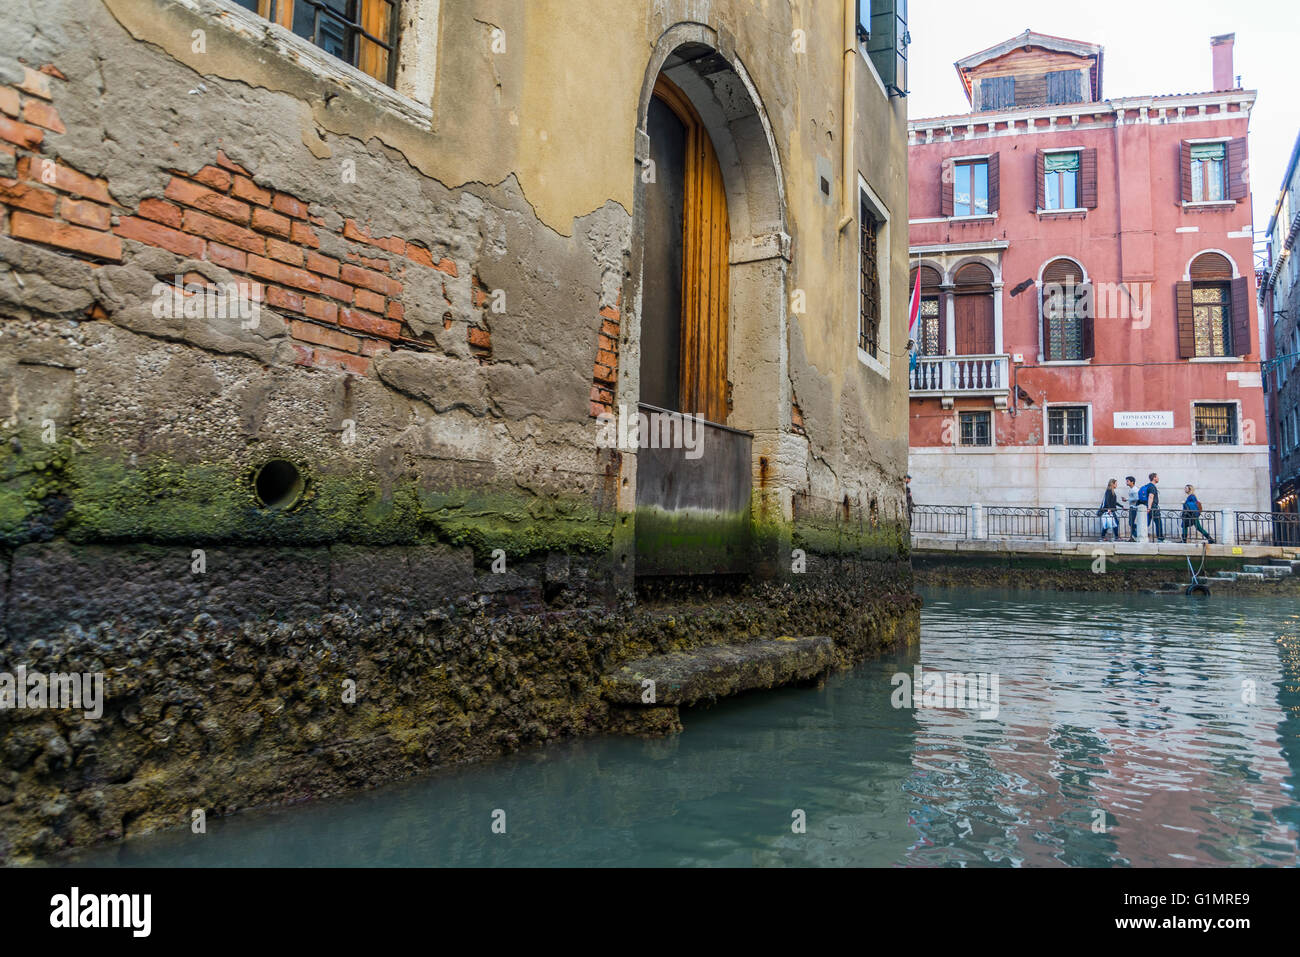 water ruins the foundations of houses along canals at Fondamenta de l'Anzolo, Venice Stock Photo